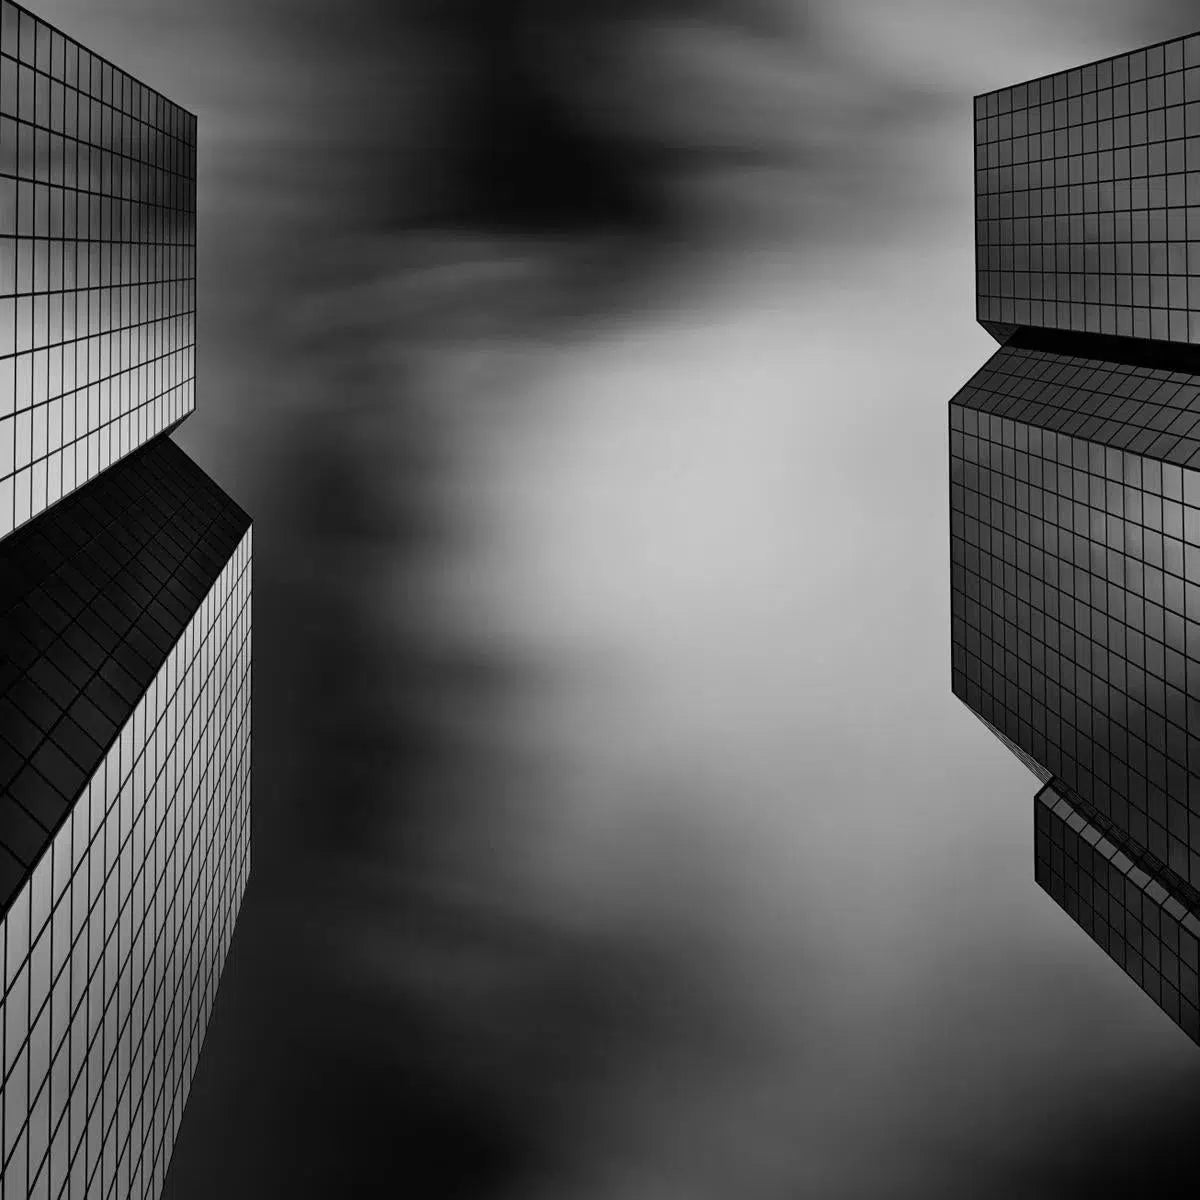 Towers and Clouds, by Rick Rose-PurePhoto